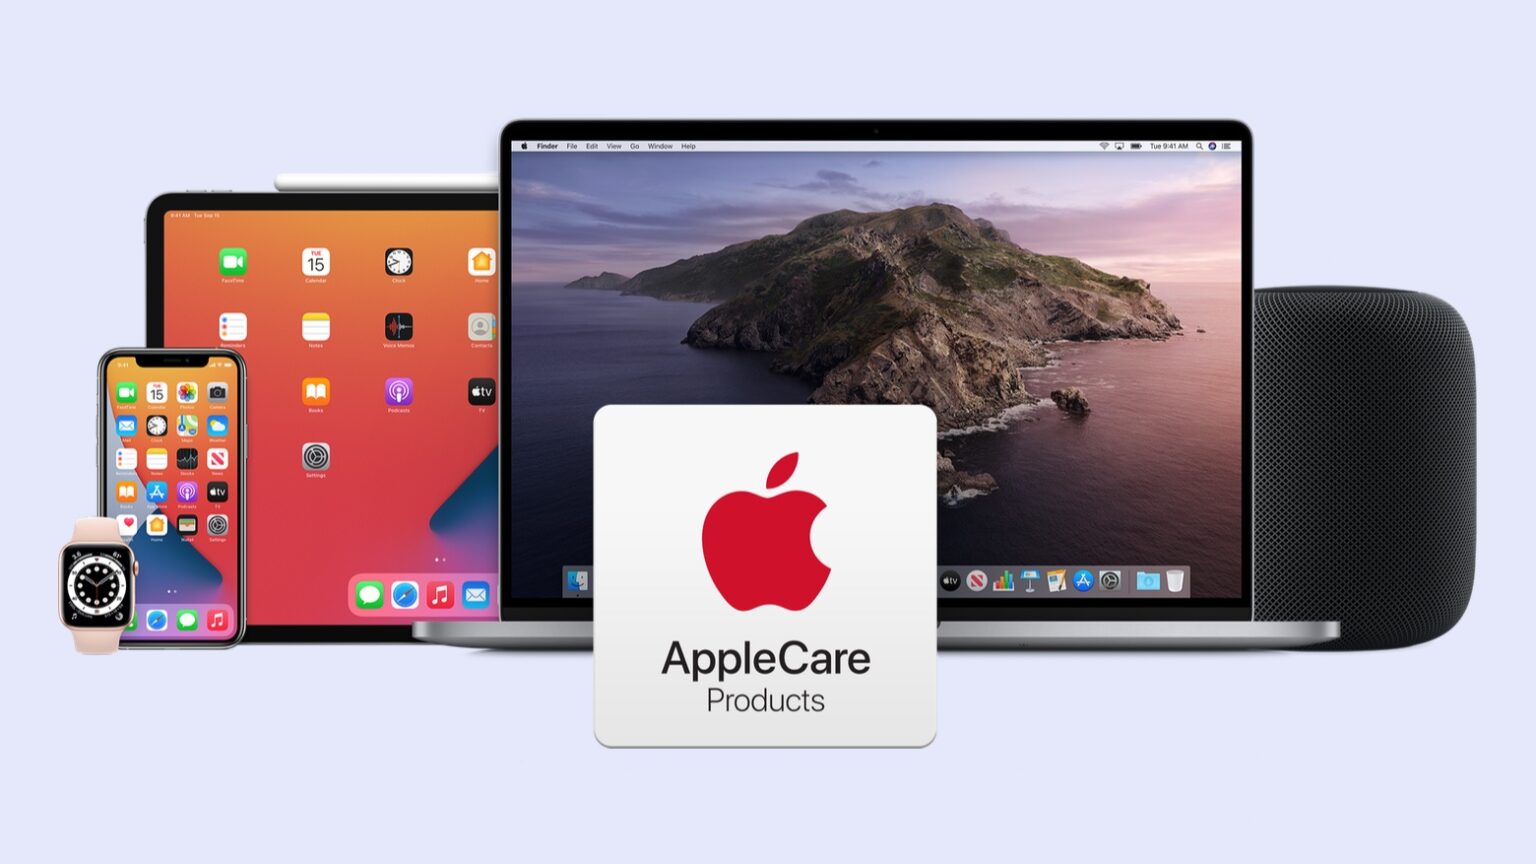 AppleCare provides extended insurance for so many Apple products.